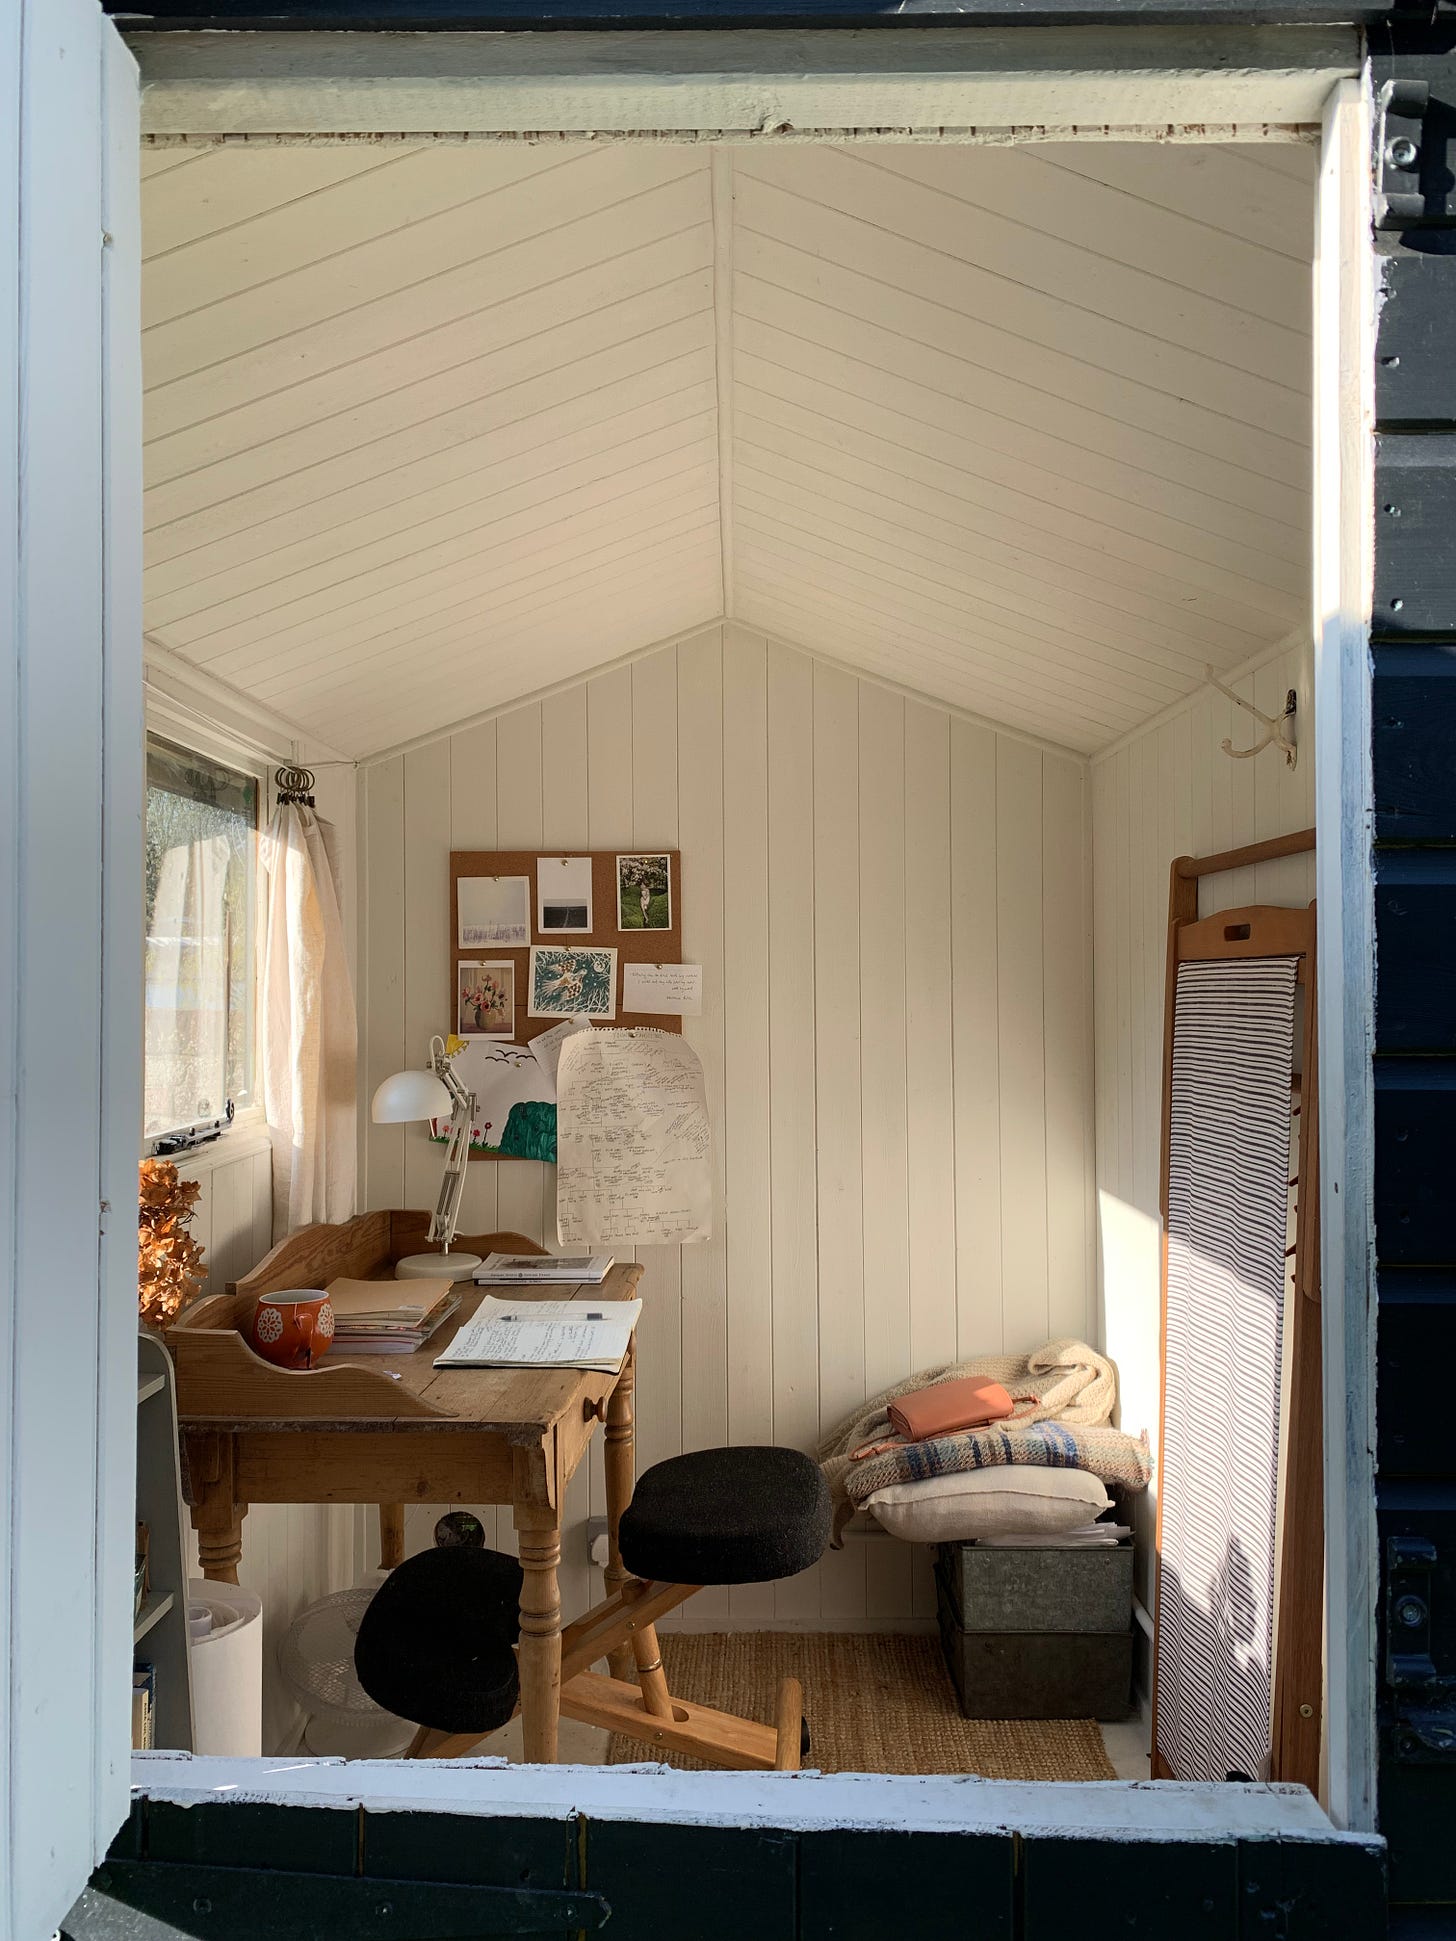 the interior of a writing shed with white walls and small wooden desk